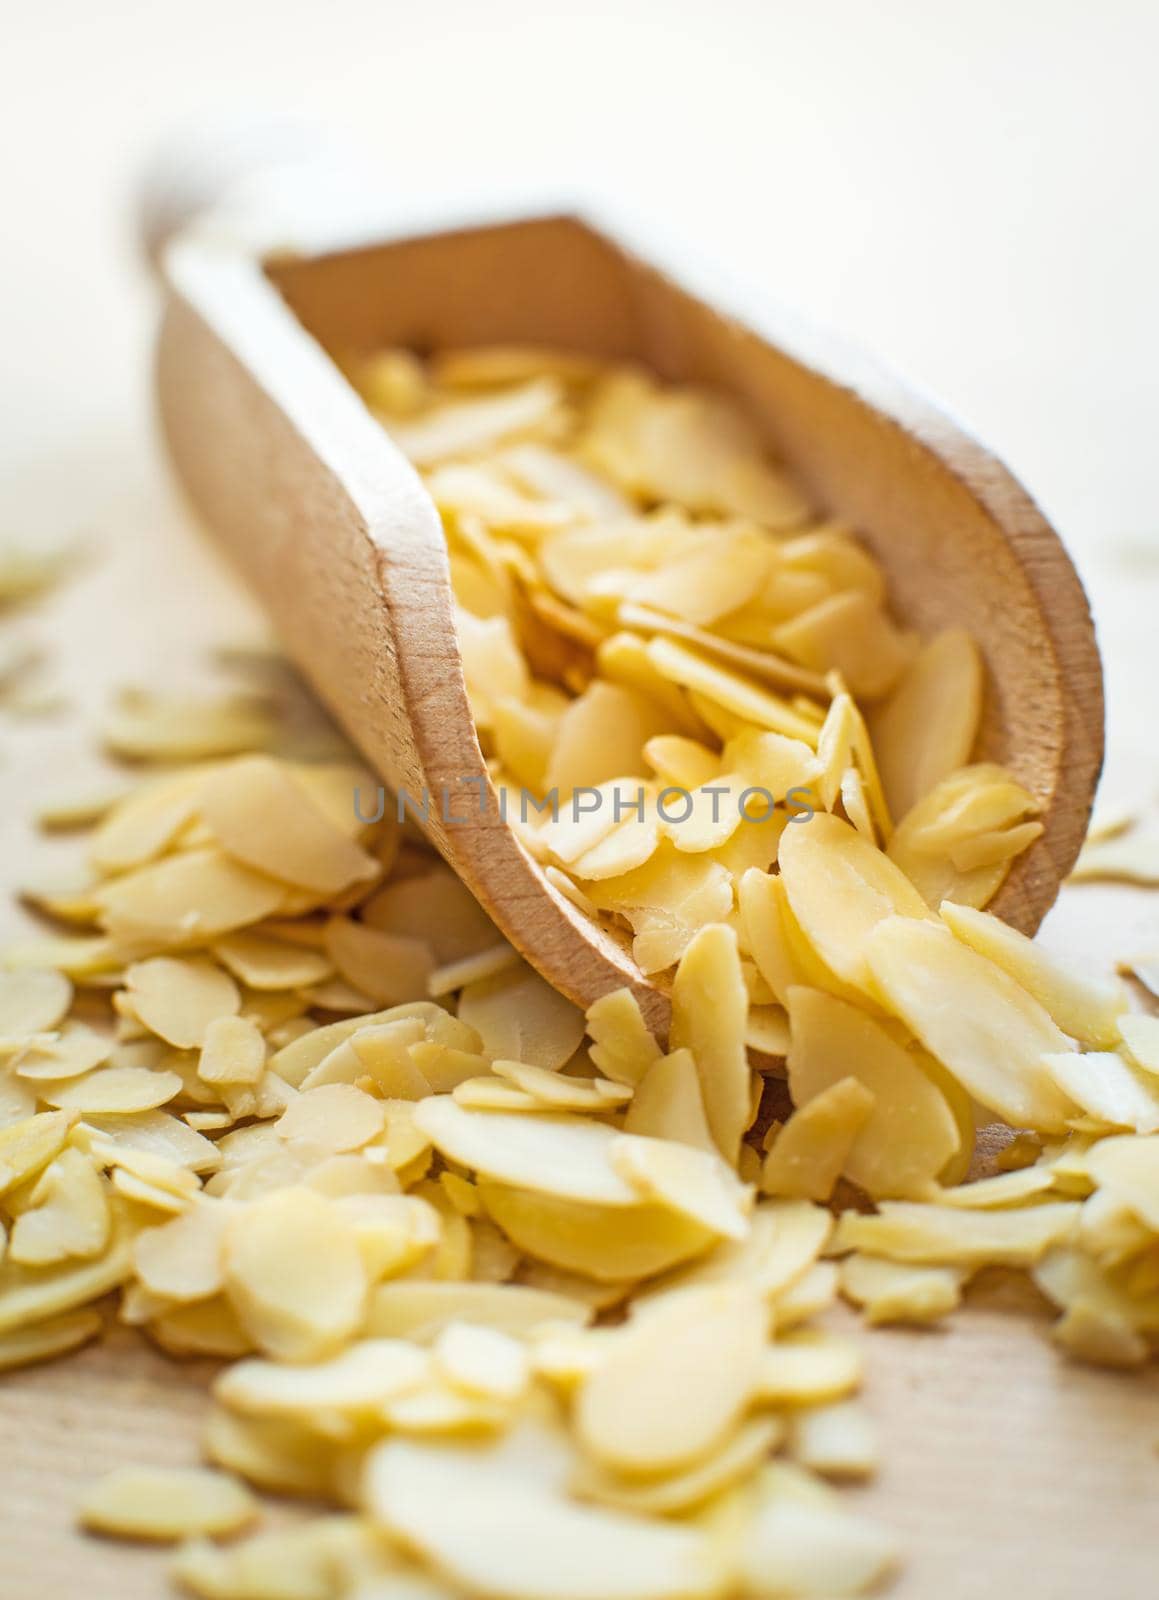 sliced almonds in a wooden spoon